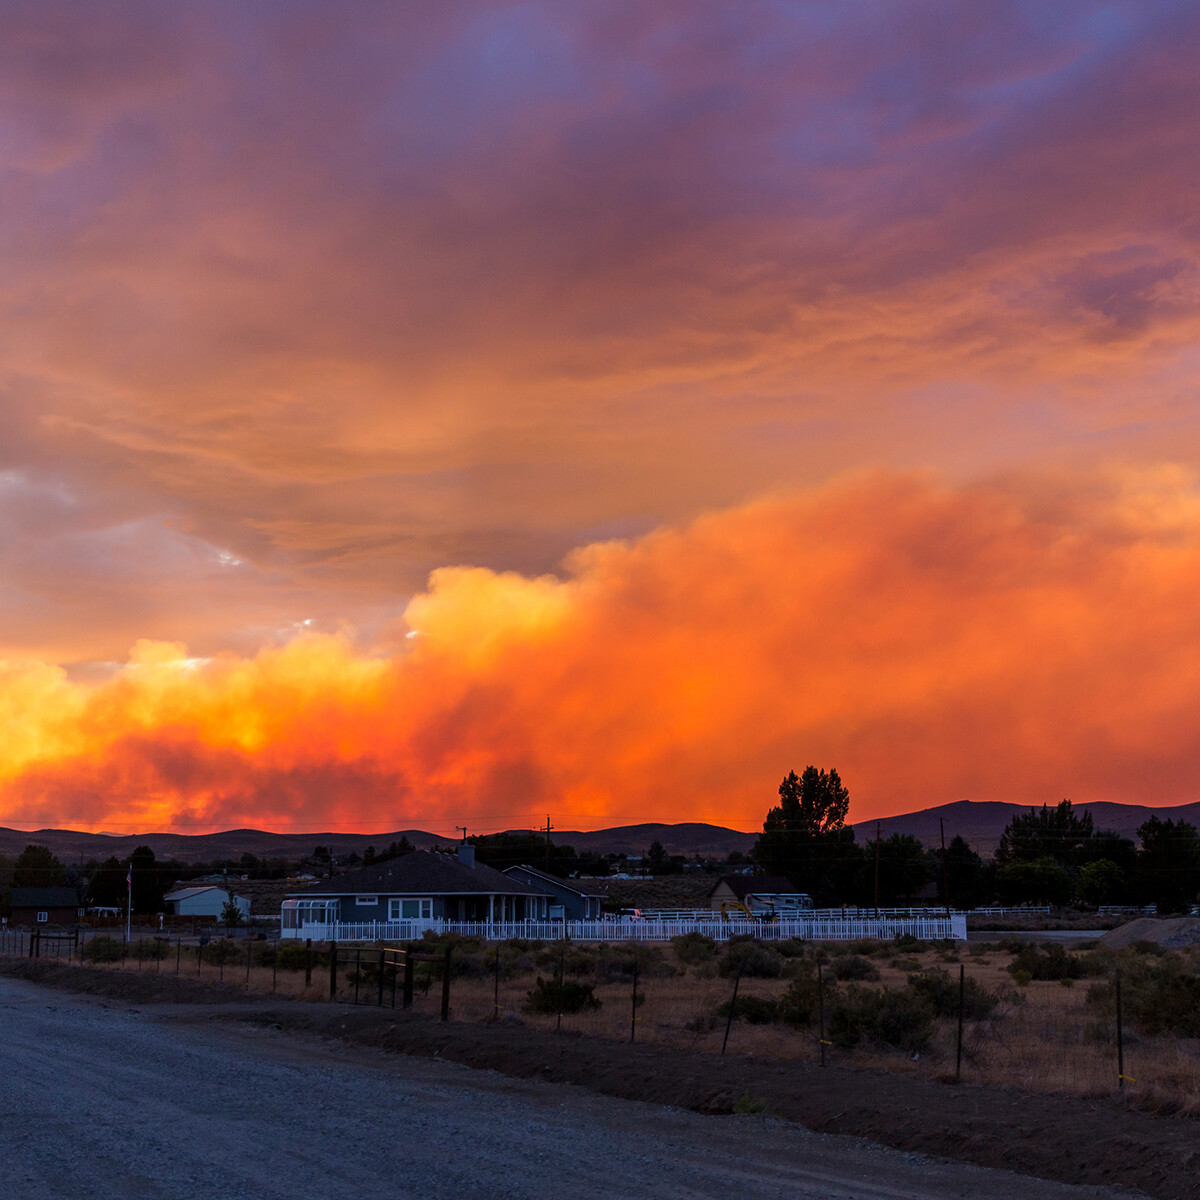 Brilliantly colored sunset in the desert over a community during a wildfire with smoke in the air road on left side